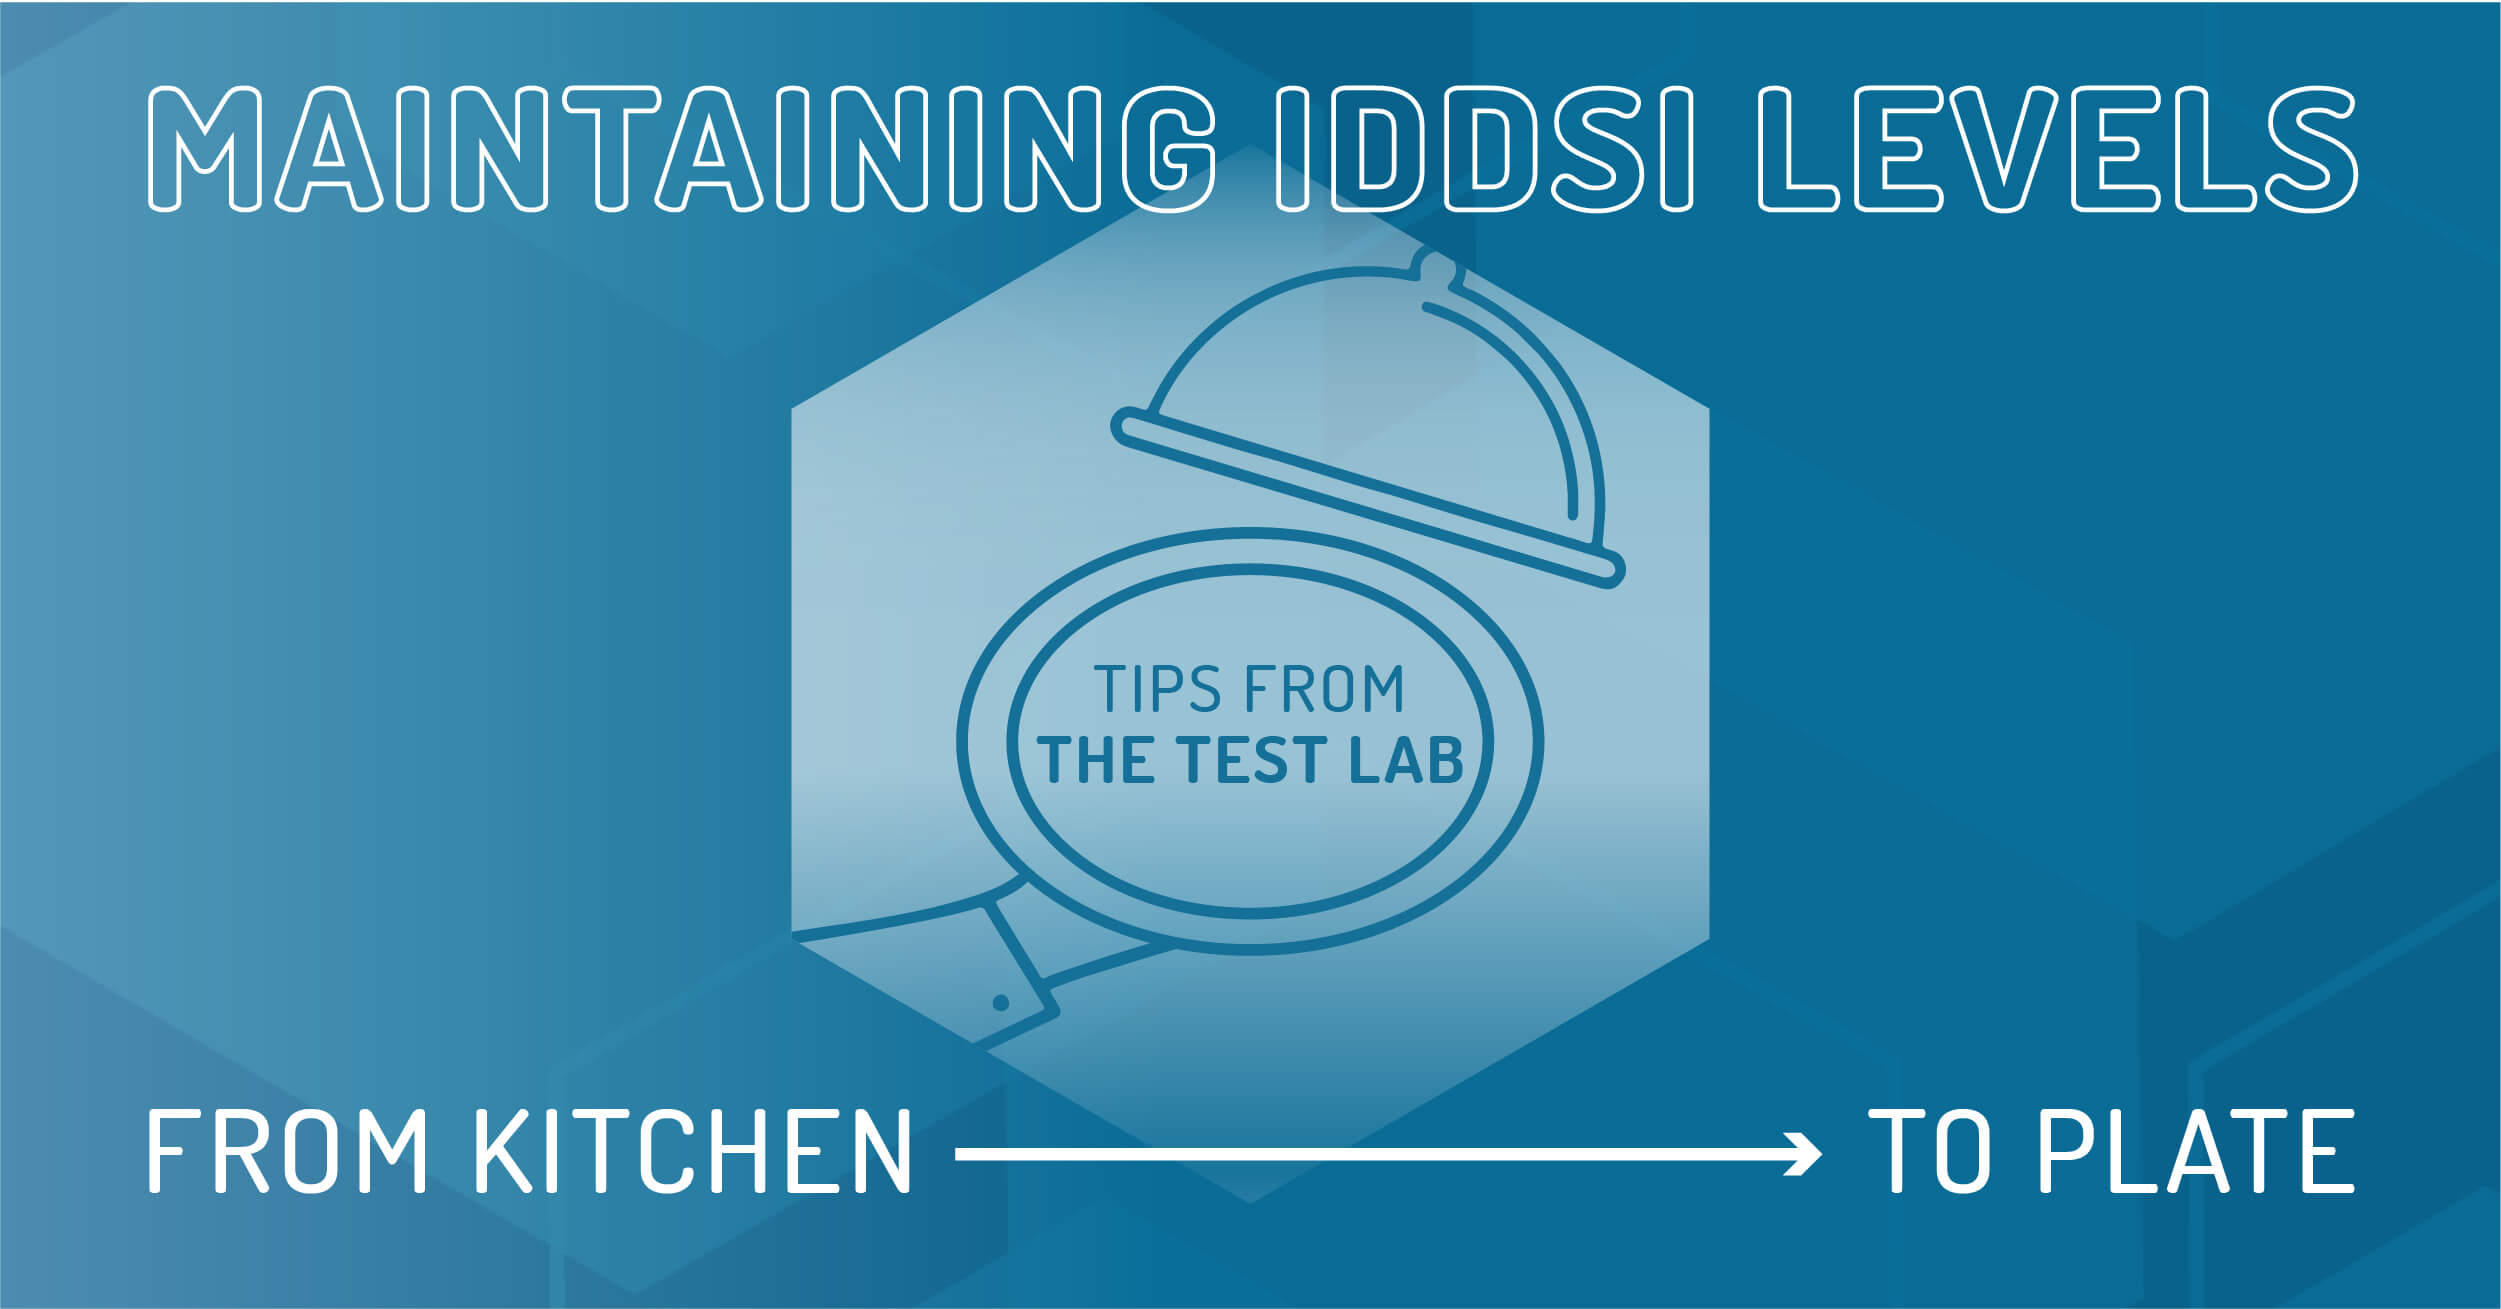 Maintaining IDDSI levels from kitchen to plate